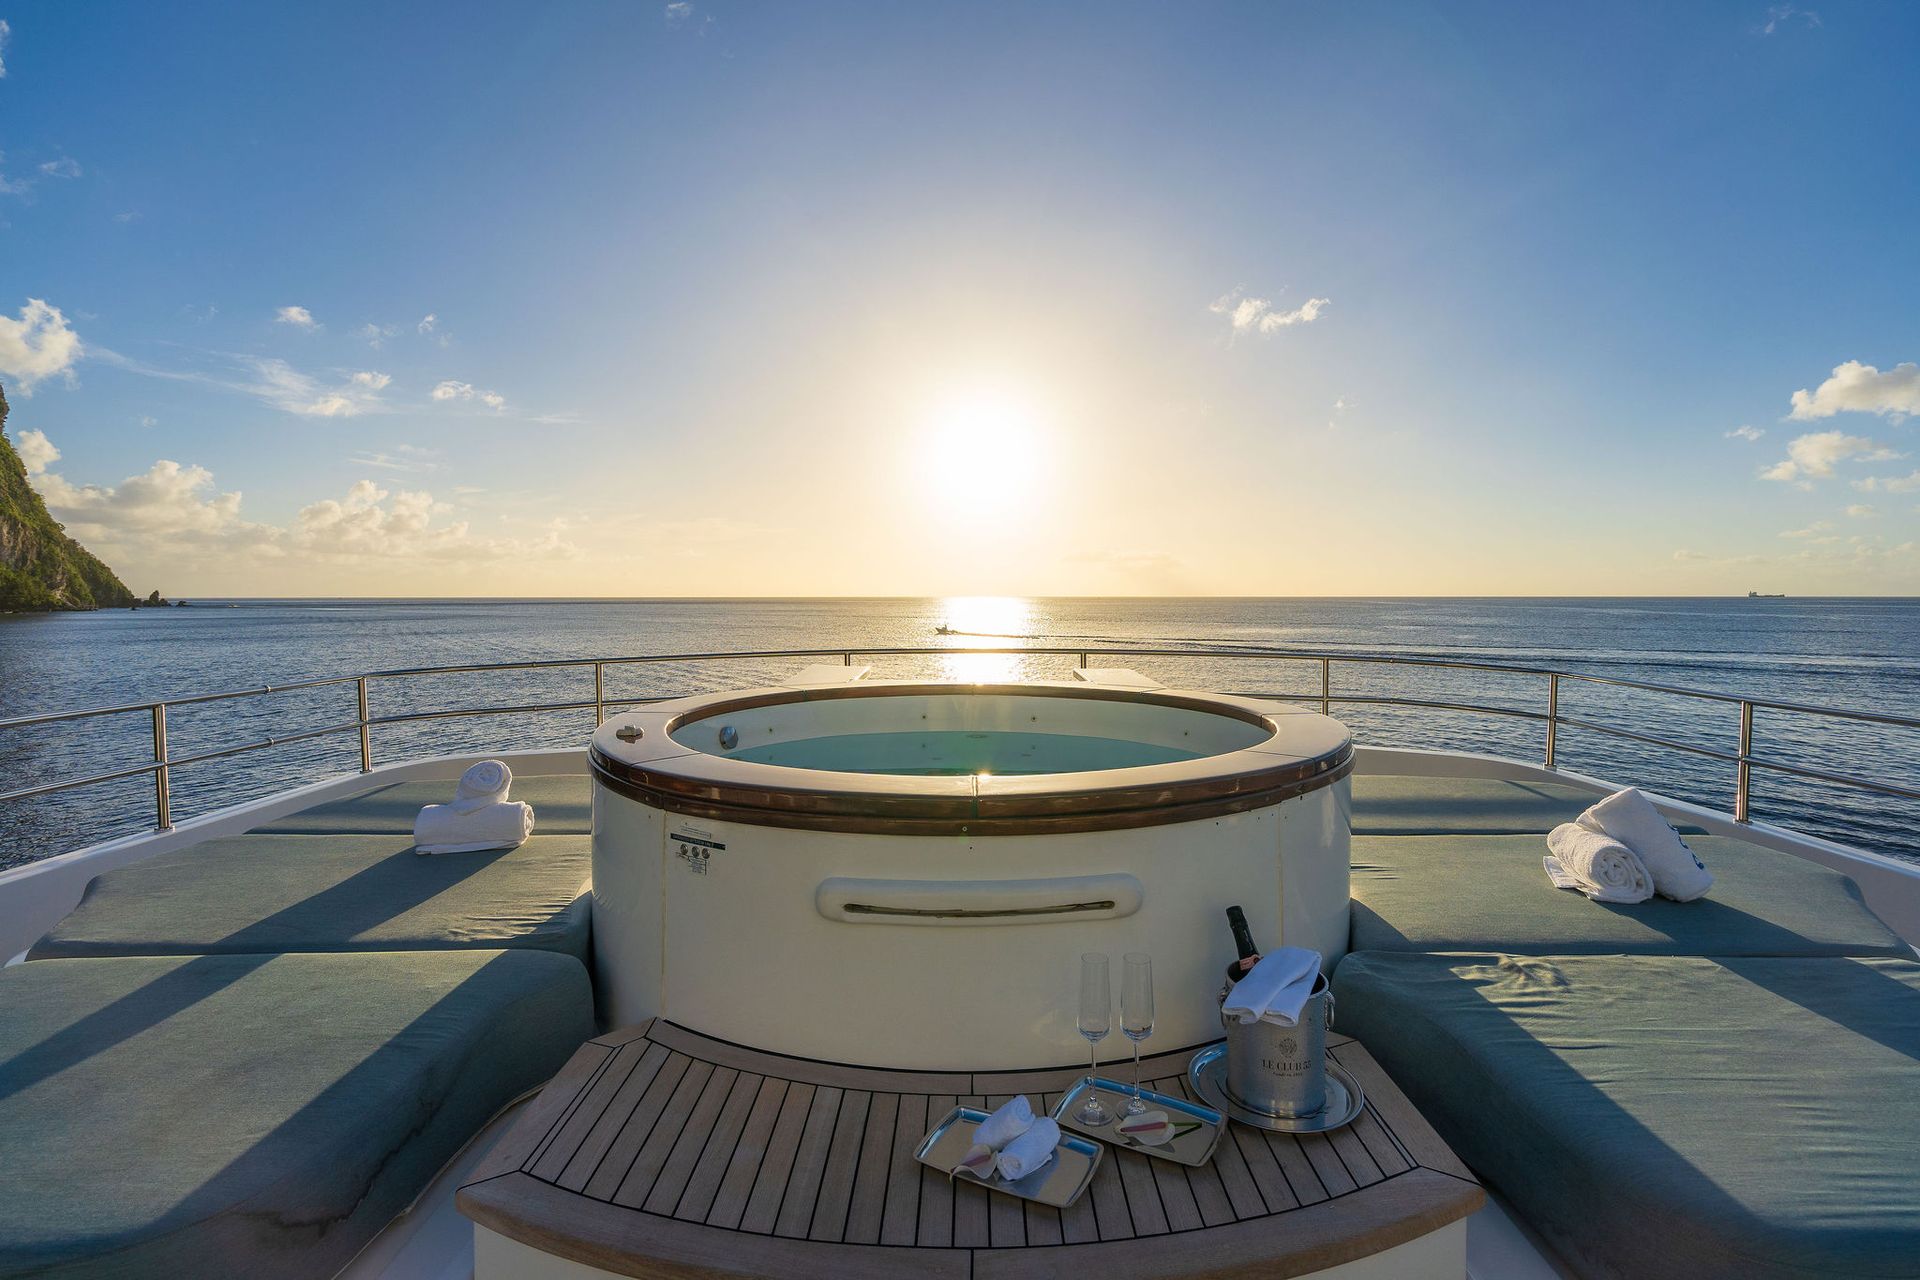 there is a hot tub on the deck of a boat in the ocean